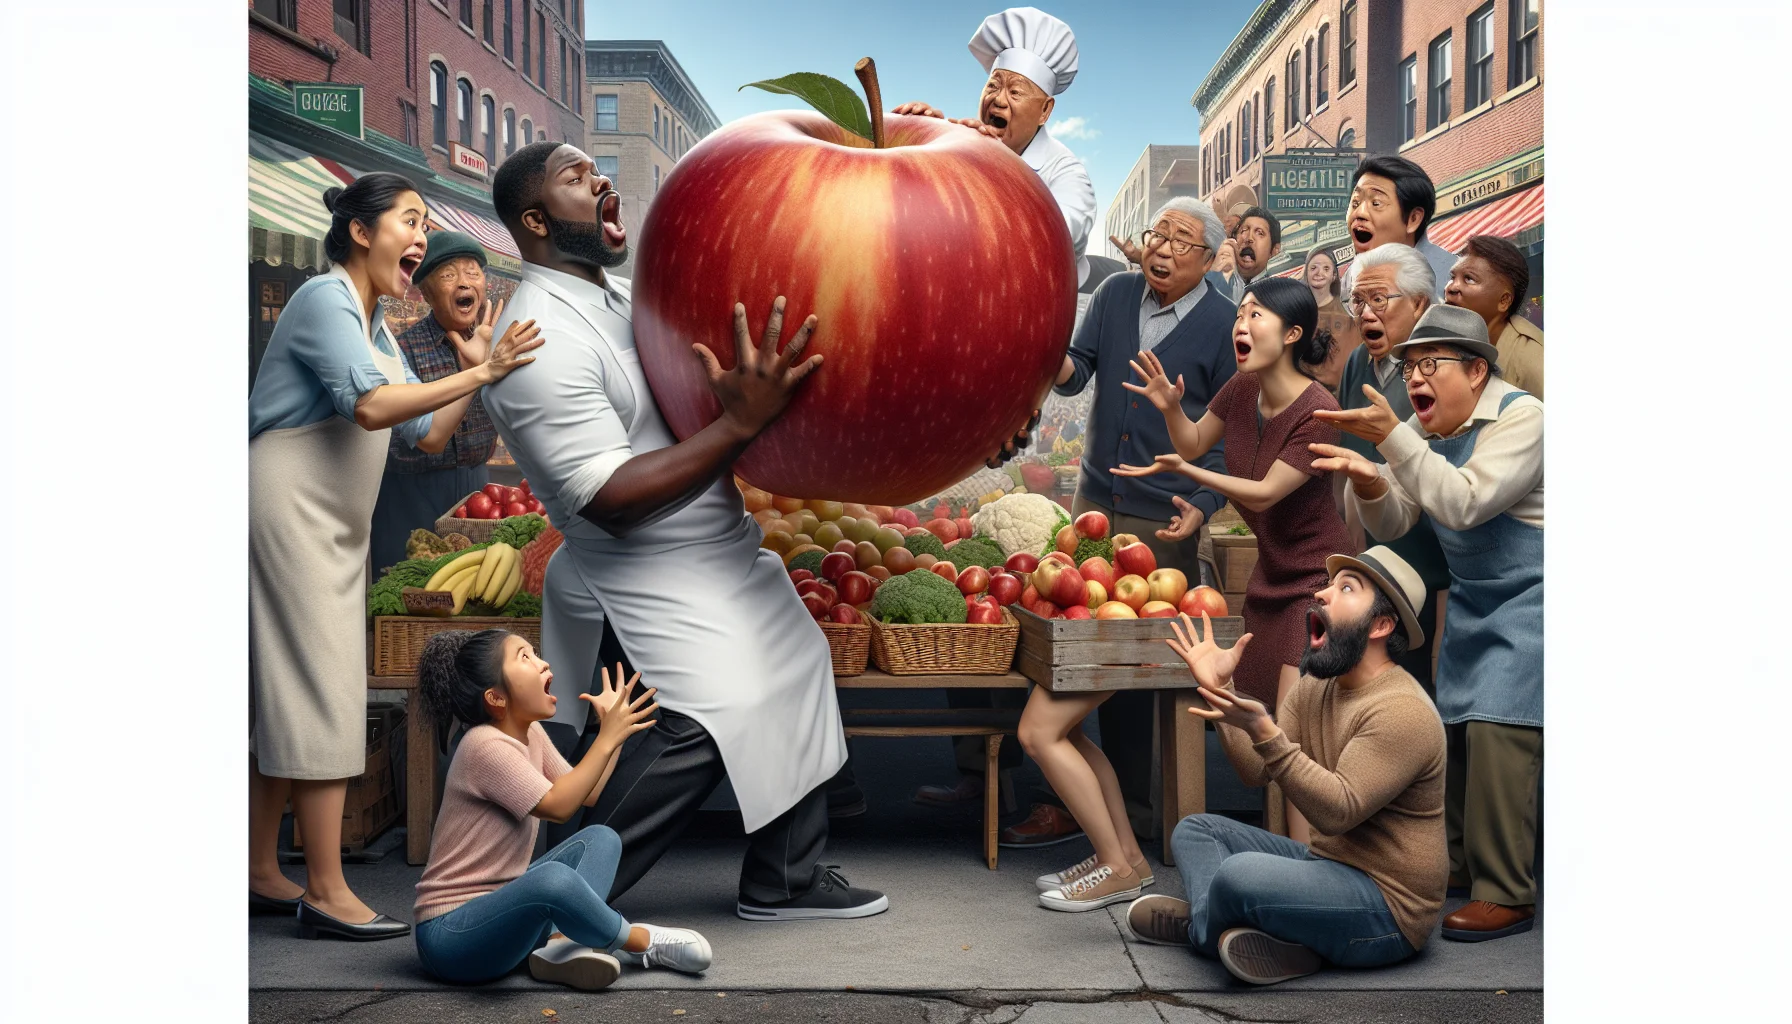 Create a realistic and humorous image showcasing a scene in a lively farmer's market. At the center, two individuals playfully negotiate the price of a giant, ripe apple. One individual, a Black man in a chef's hat, is passionately describing its delicious flavor while holding the massive fruit. The other individual, an Asian woman in casual attire, responds with surprised laughter and a playful roll of her eyes to his sales pitch. Other shoppers, consisting of a diverse group of people of various descents and genders including a Middle Eastern man, a Hispanic woman, a Caucasian man, and others, curiously look on at the funny spectacle. The overall feeling should make the viewer believe that having and cooking real, fresh food is not only affordable but also enjoyable.